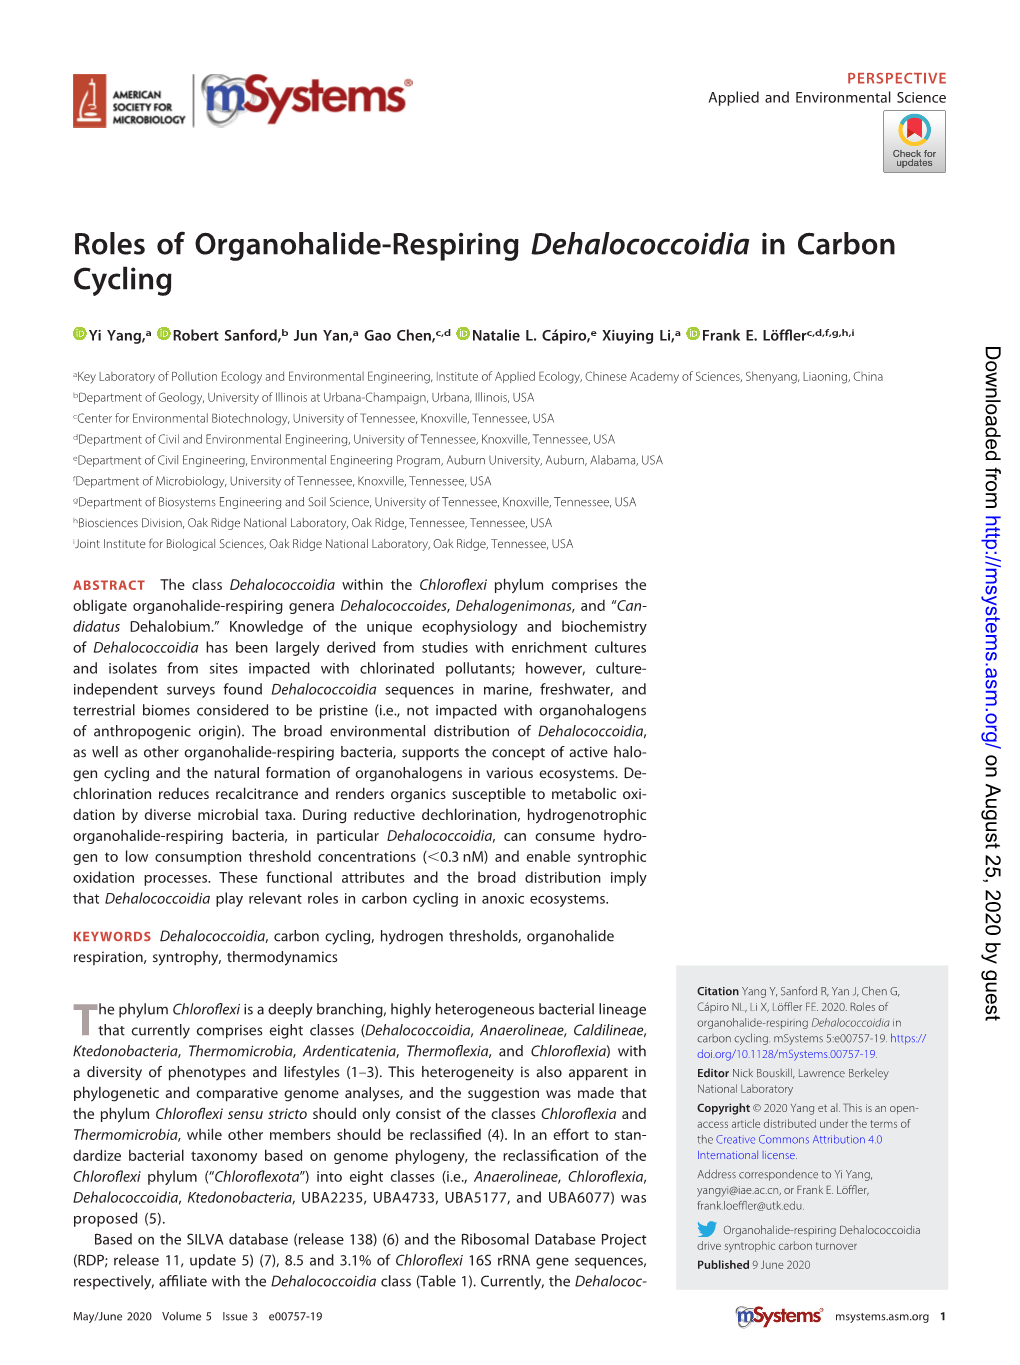 Roles of Organohalide-Respiring Dehalococcoidia in Carbon Cycling